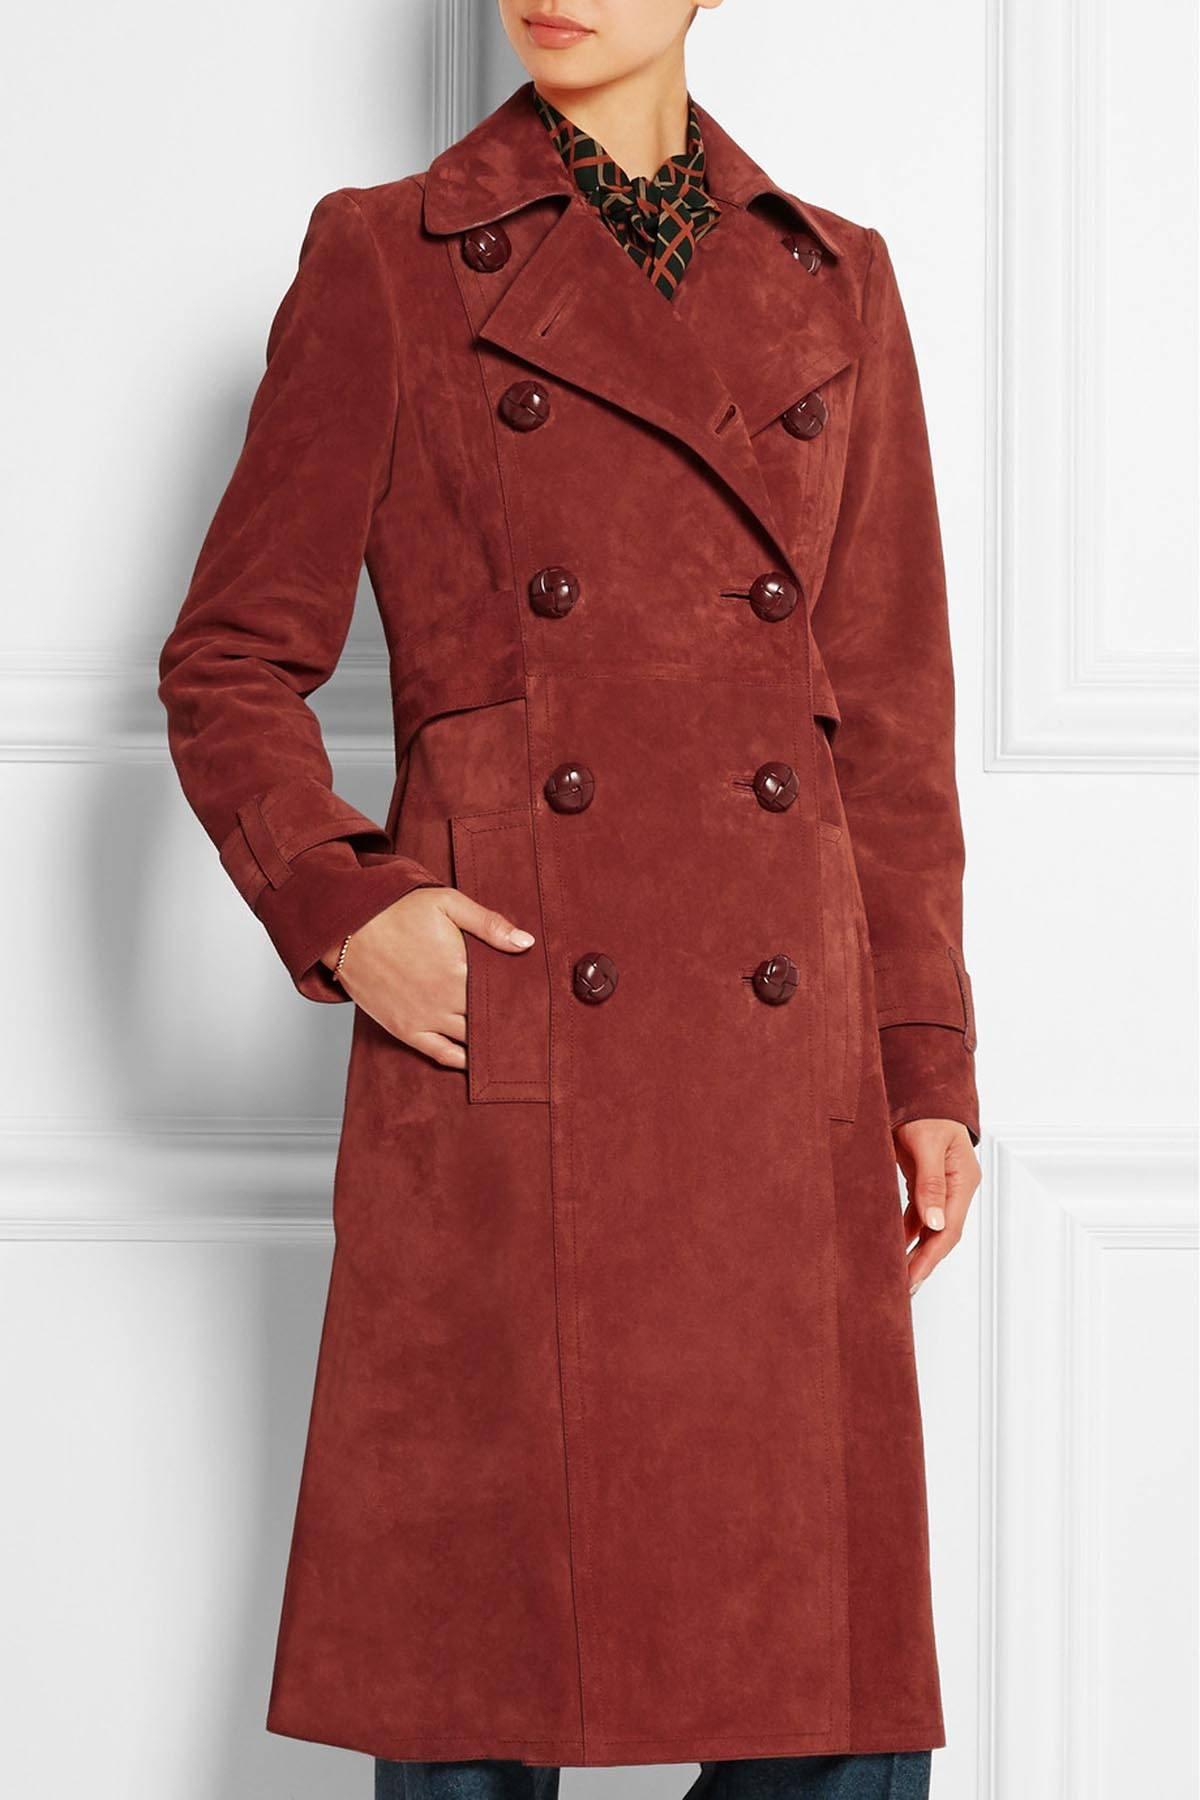 Brown New Gucci Brick Red Suede Belted Leather Buttons Women's Trench Coat